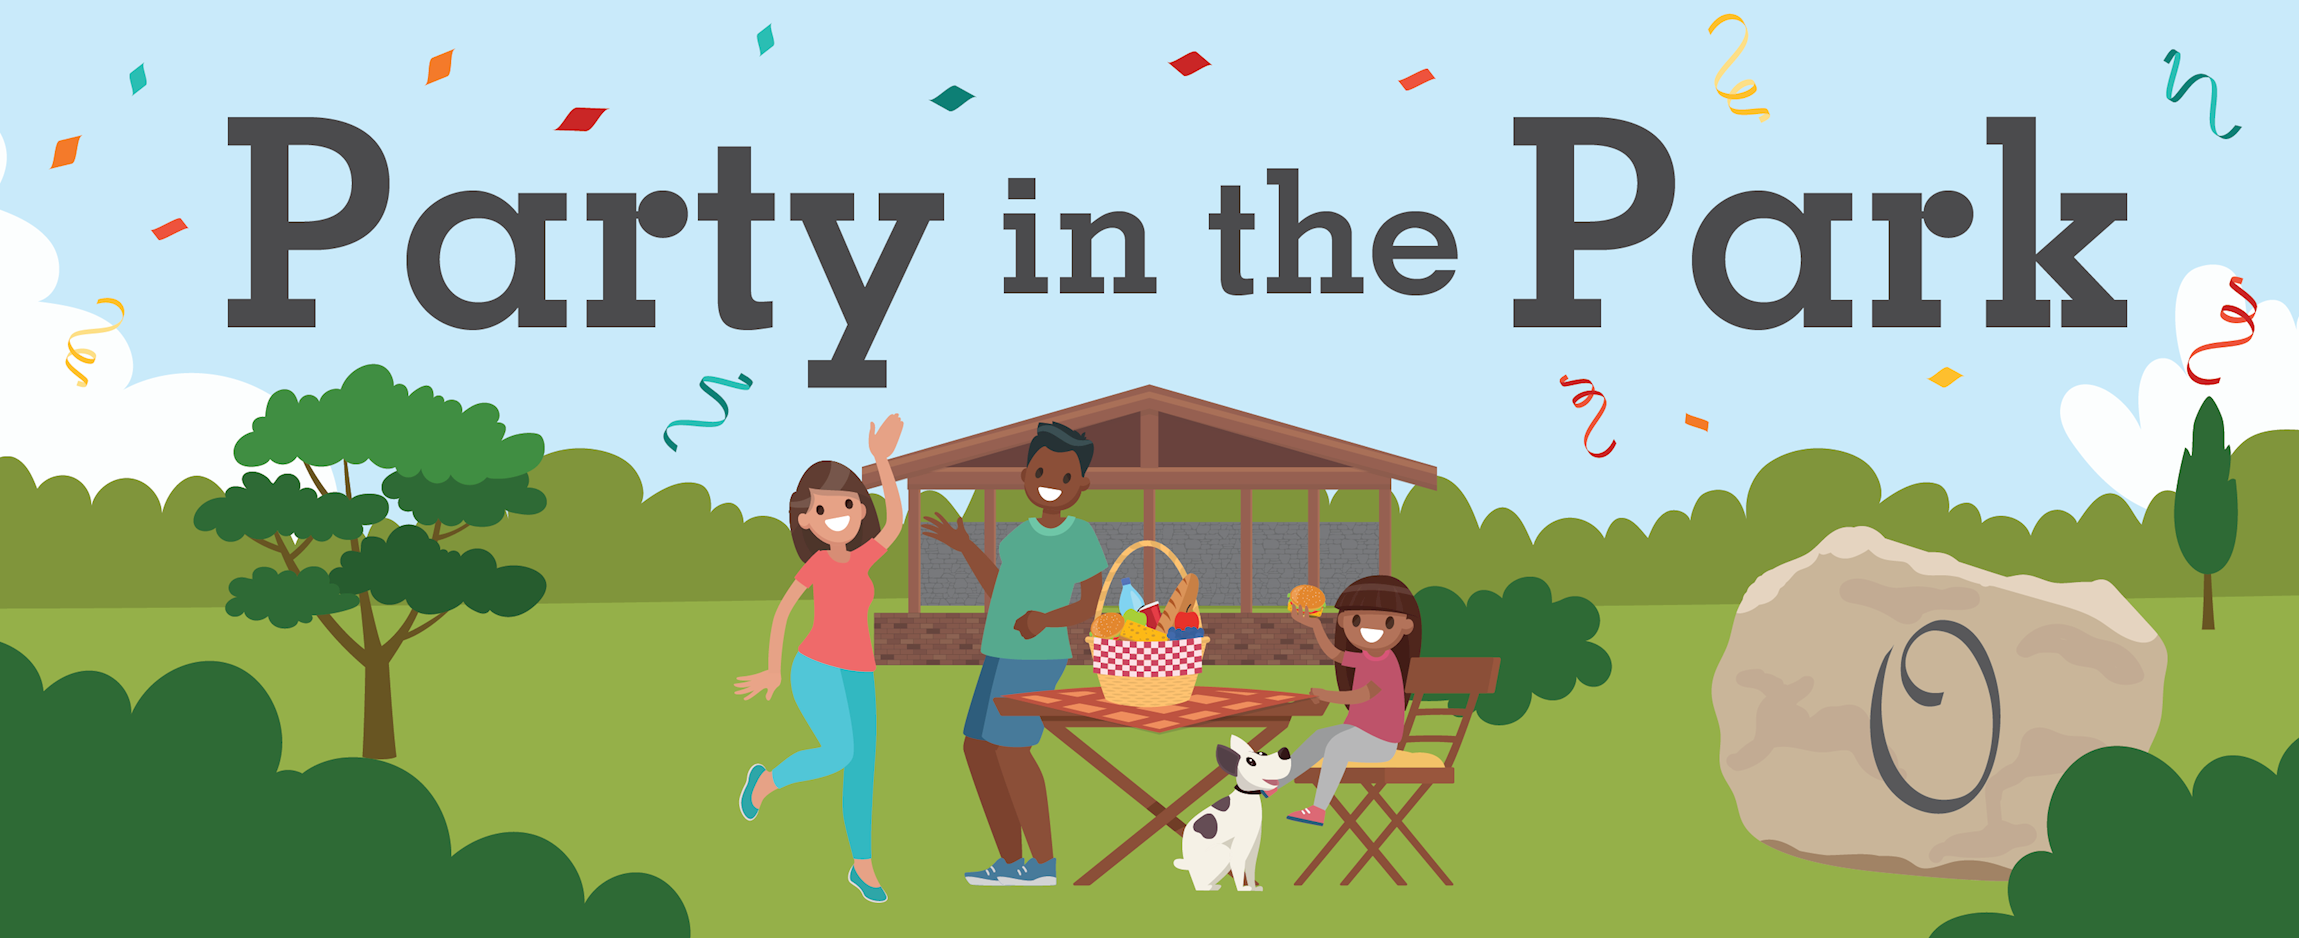 Party in the Park logo